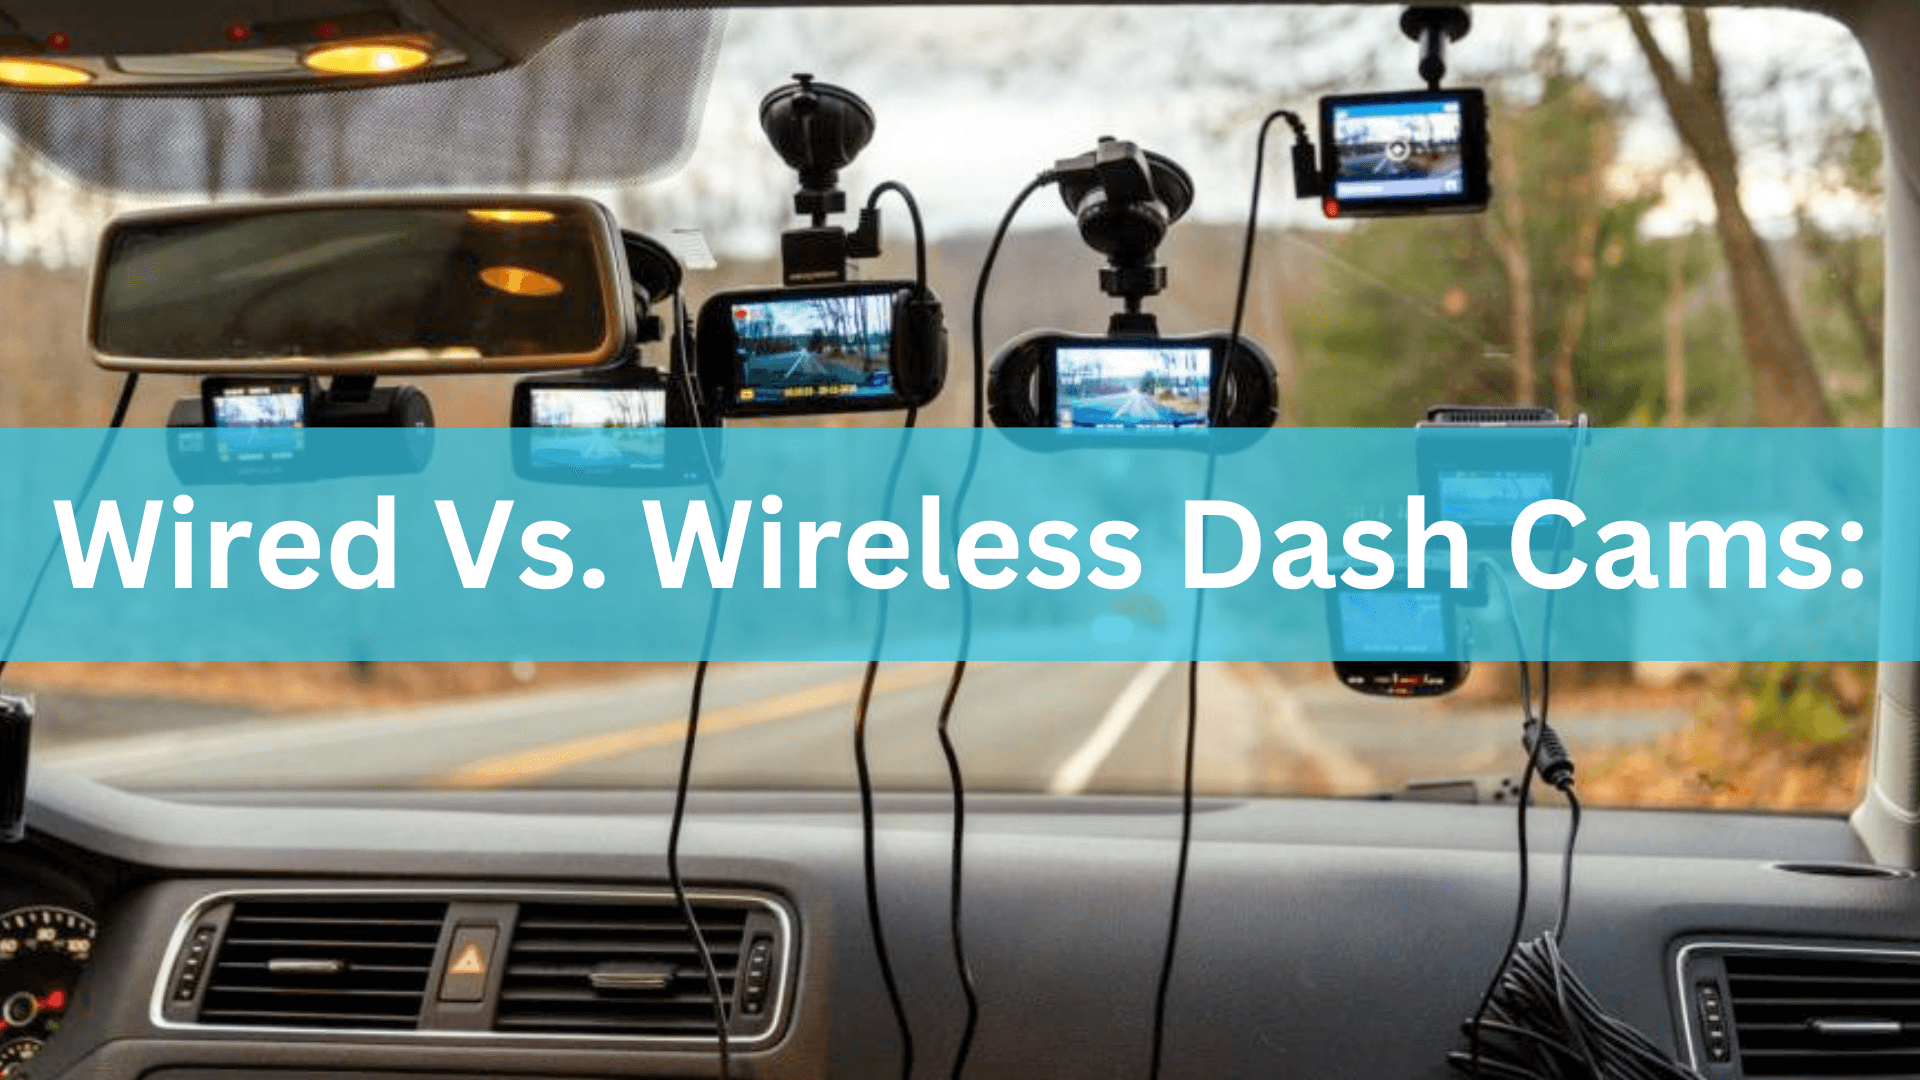 Why there are no wireless dash cams